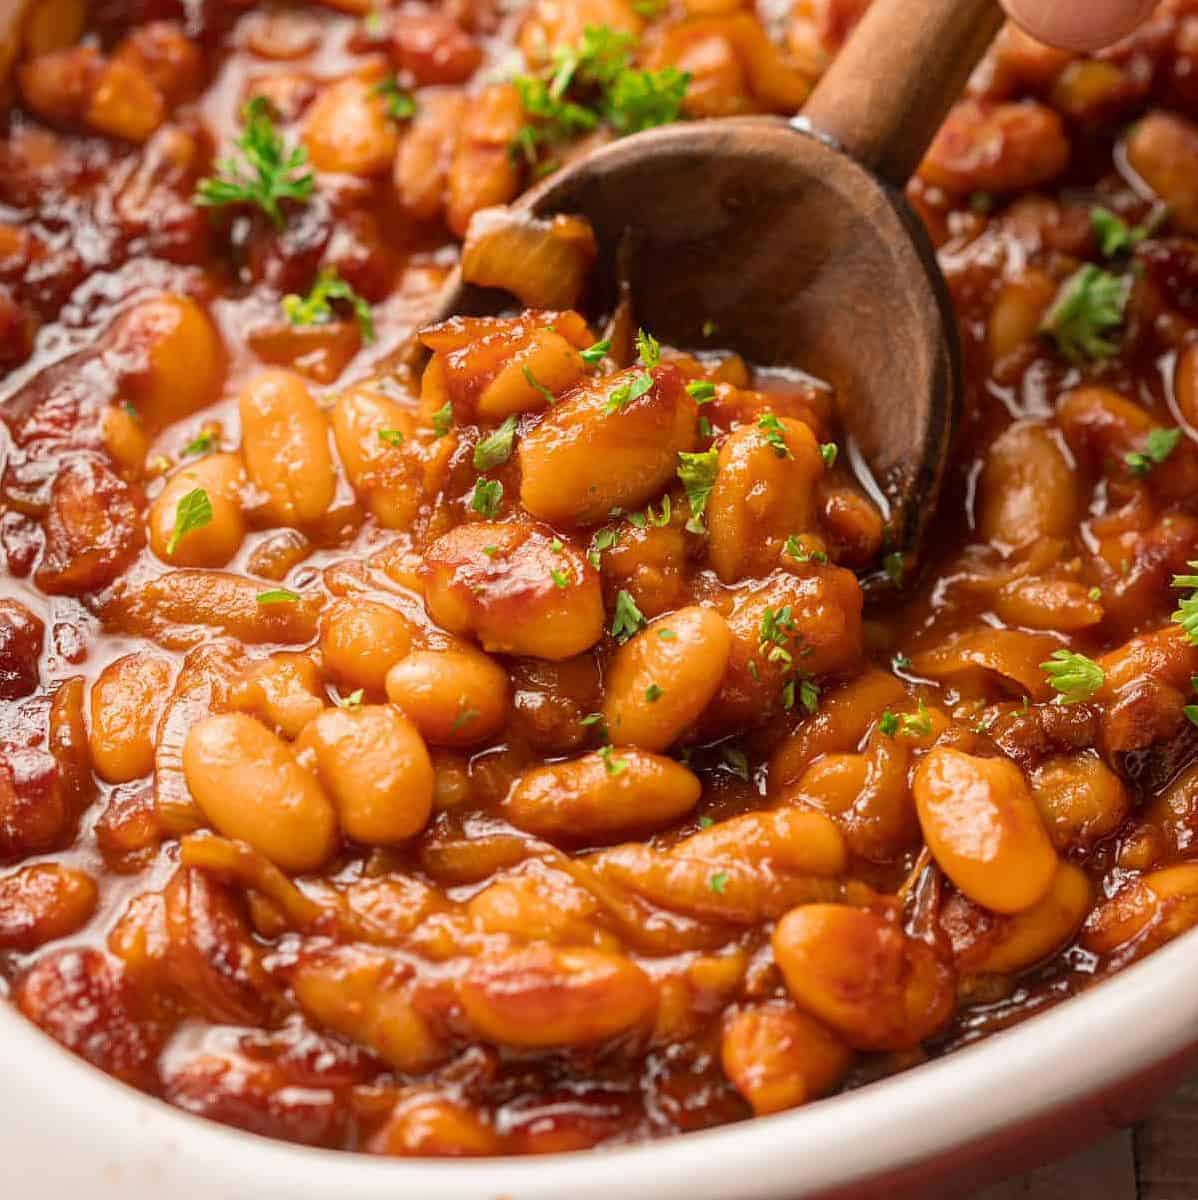  Get ready to fall in love with the sweet and savory flavors of these vegetarian baked beans.